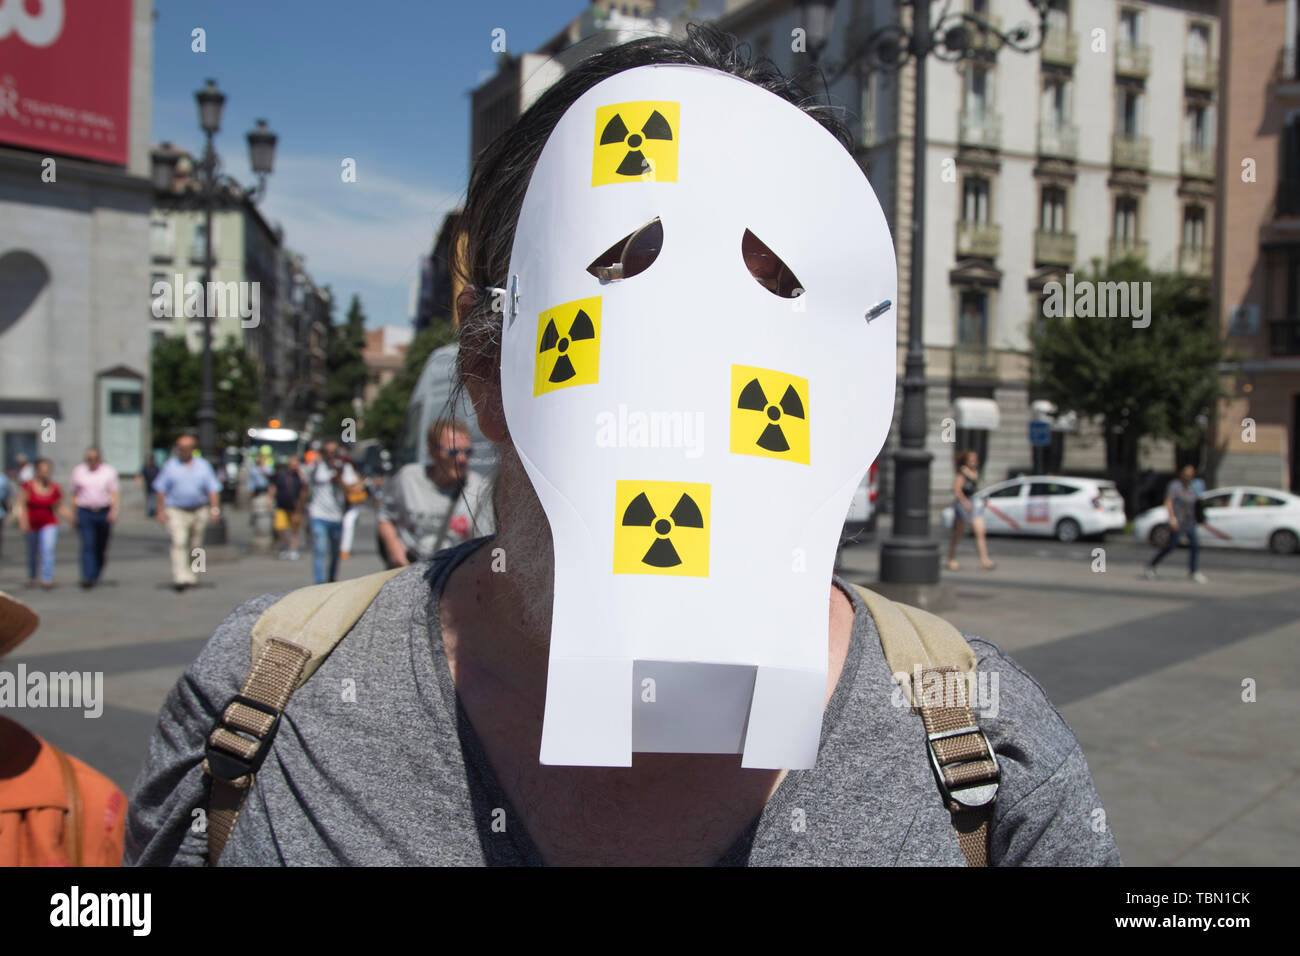 Activist with a face mask during protest. Ecologists from the Iberian Peninsula accompanied by activists from the United States, Turkey, France and Argentina, protested in Madrid for the closure of nuclear power plants, uranium mines and high-level radioactive waste management. In addition, activists have protested a new energy model to avoid cases such as Chernobyl in Ukraine and have demanded the closure of the Almaraz Nuclear Power Plant in Spain. Stock Photo